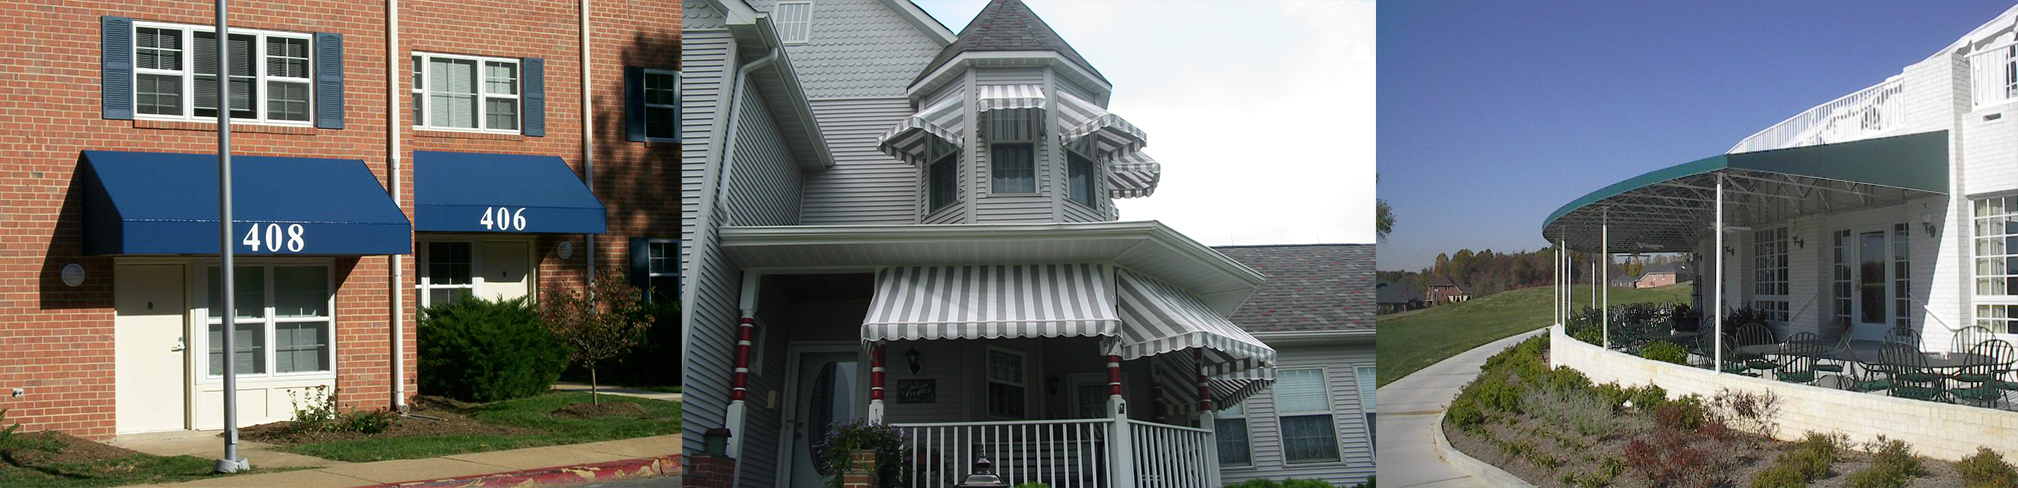 Fabric Canopies For Commercial or Residential spaces